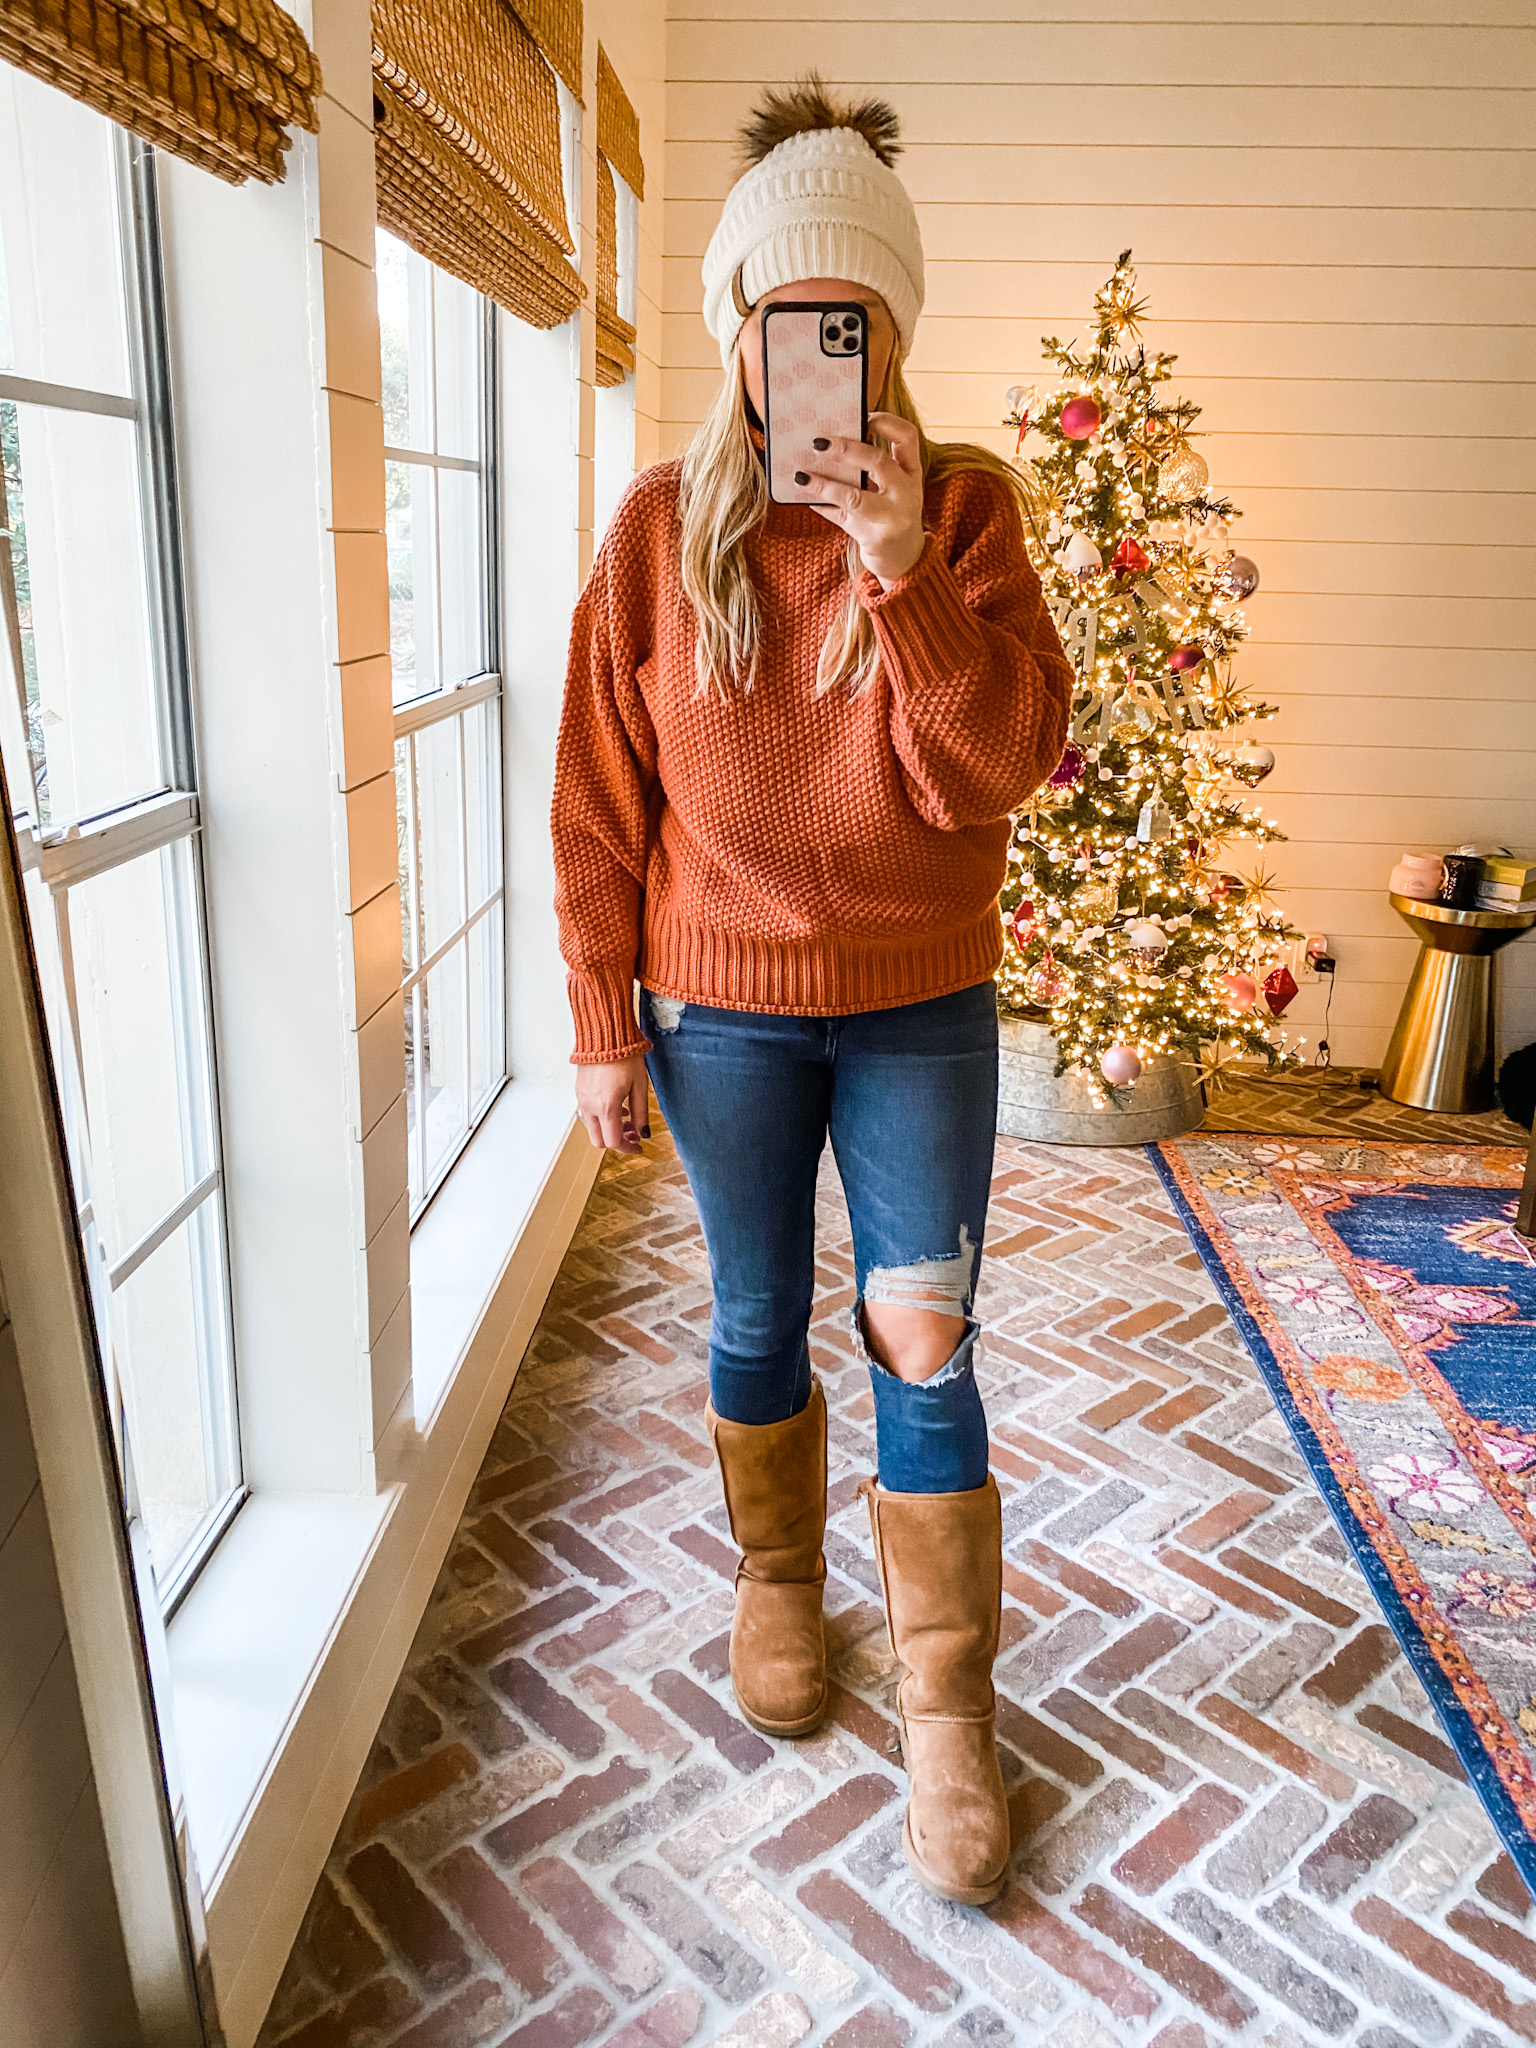 December Outfits by popular Houston fashion blog, Fancy Ashley: image of a woman standing in front of a Christmas tree decorated with pink, white and silver ornaments and wearing a orange cable knit sweater, distressed denim, cream fur pom beanie, and brown suede Ugg boots.